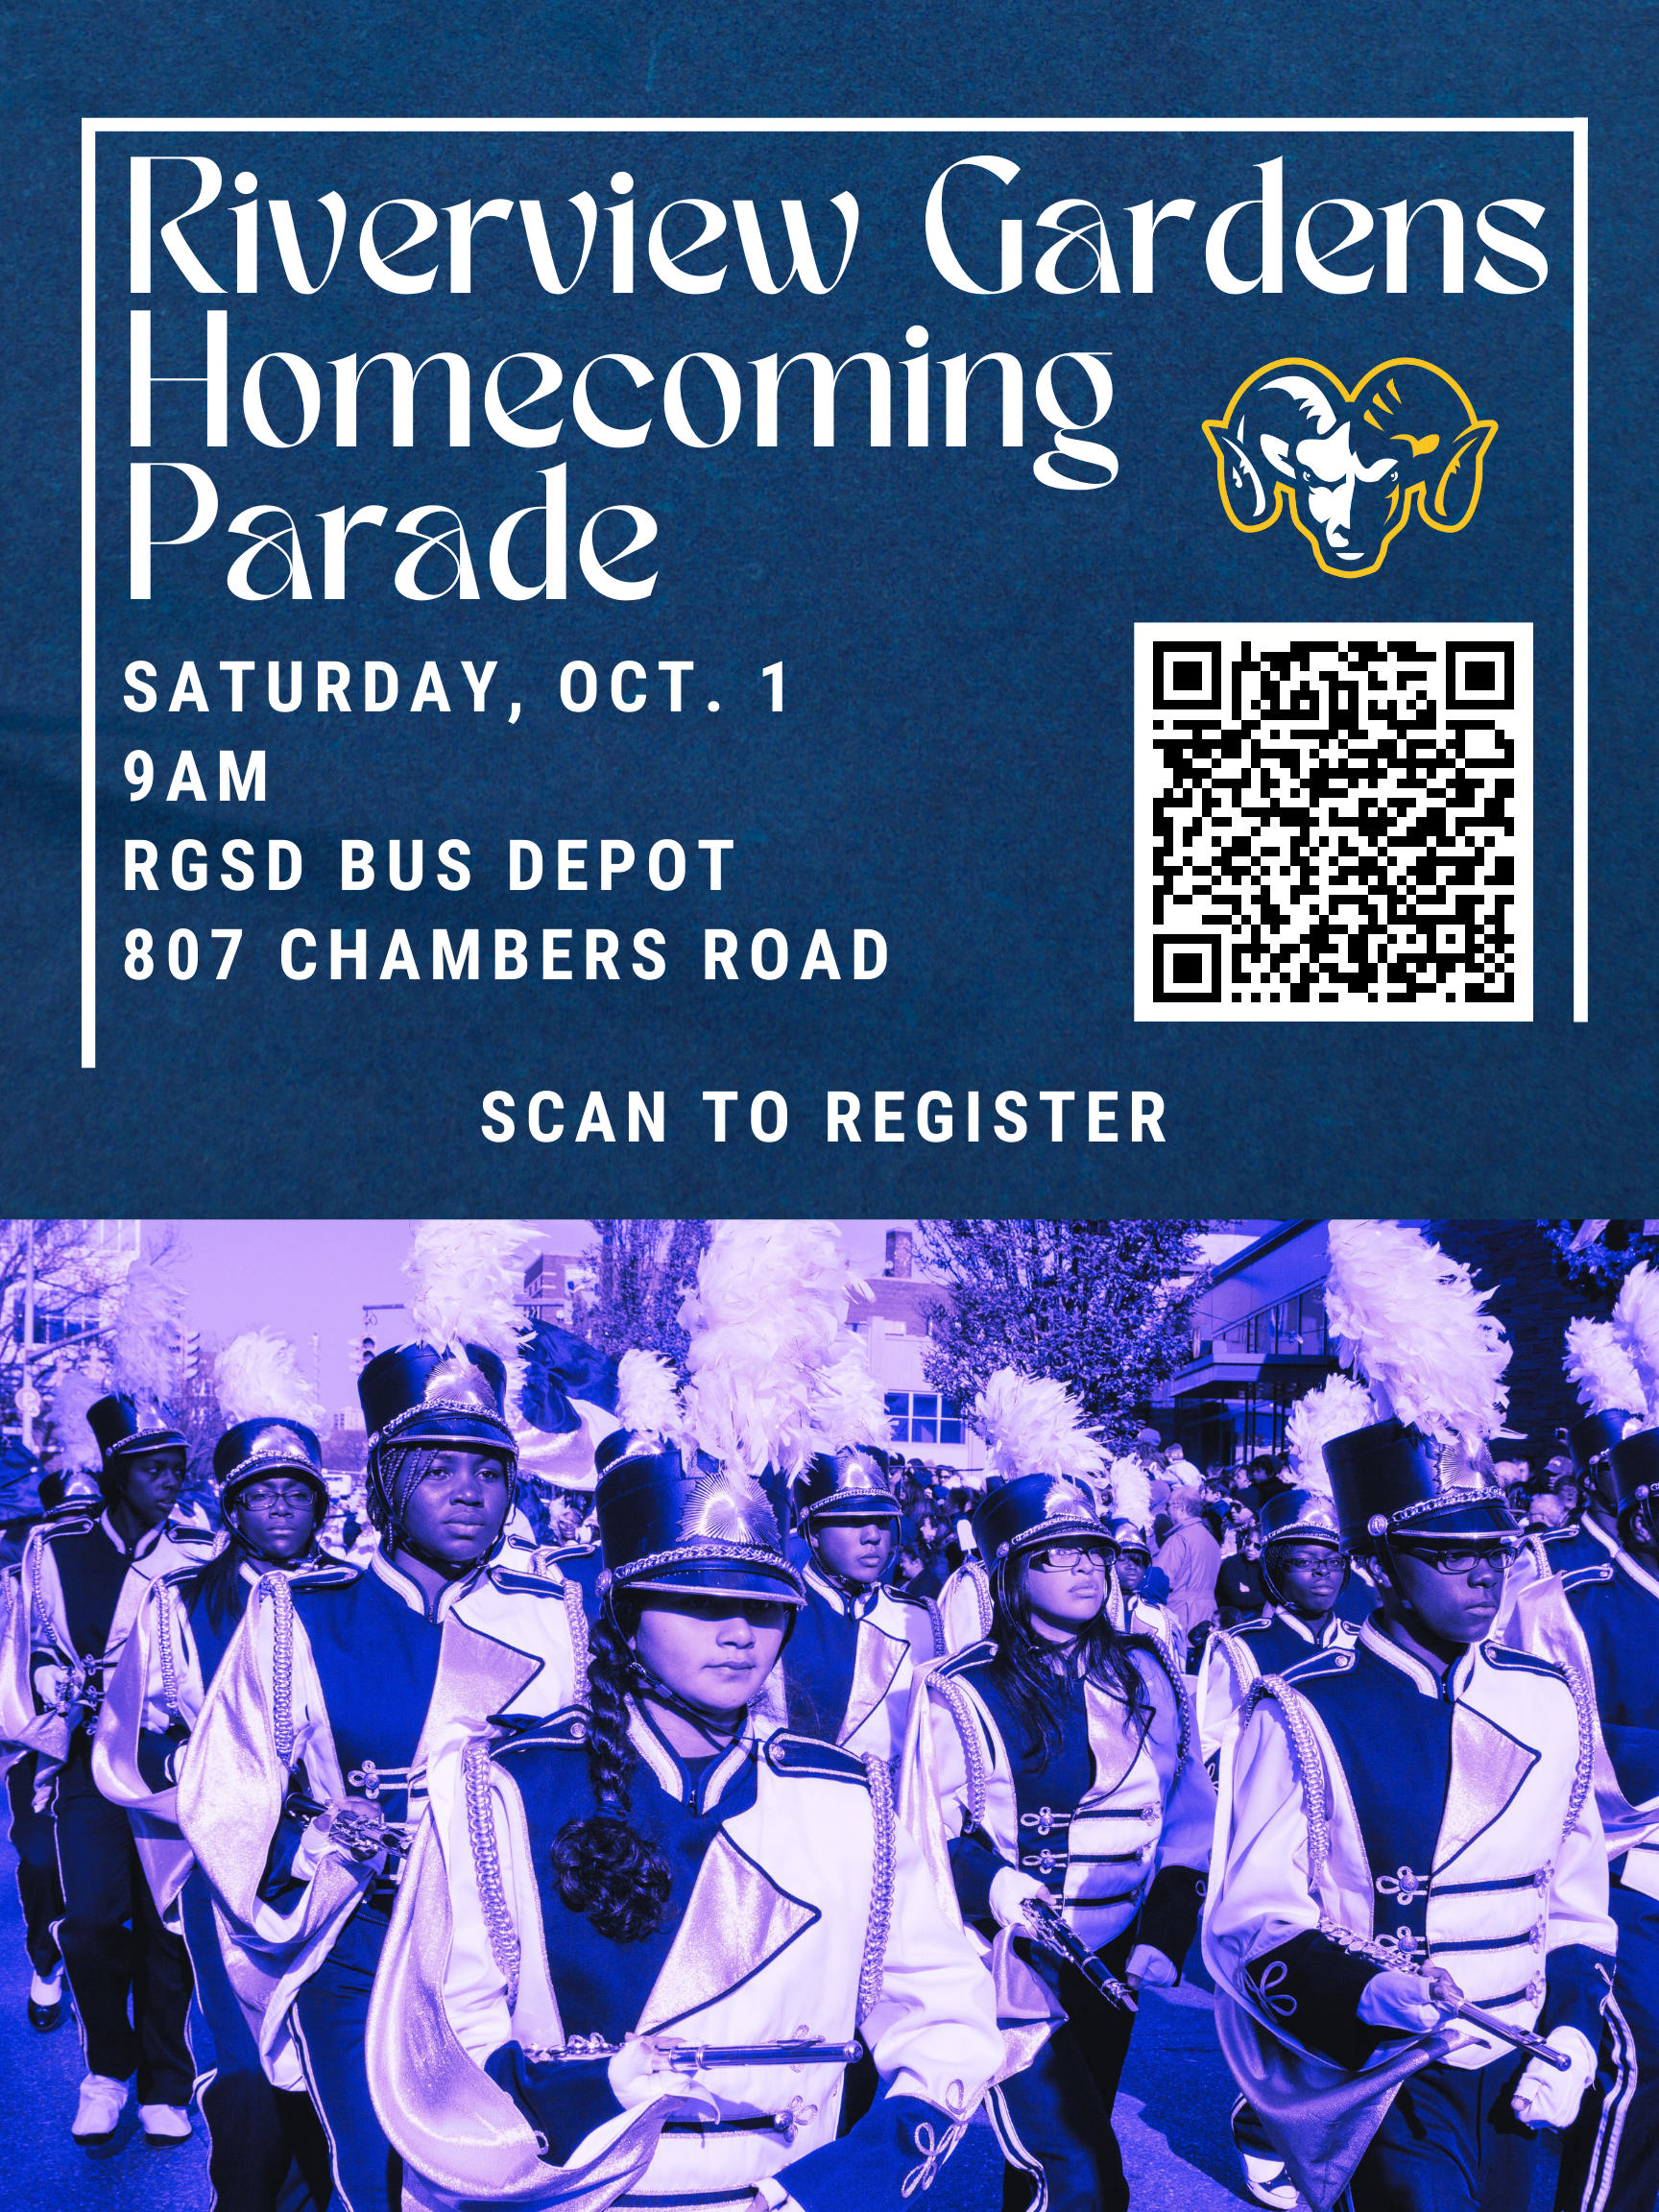 Register for the Homecoming Parade